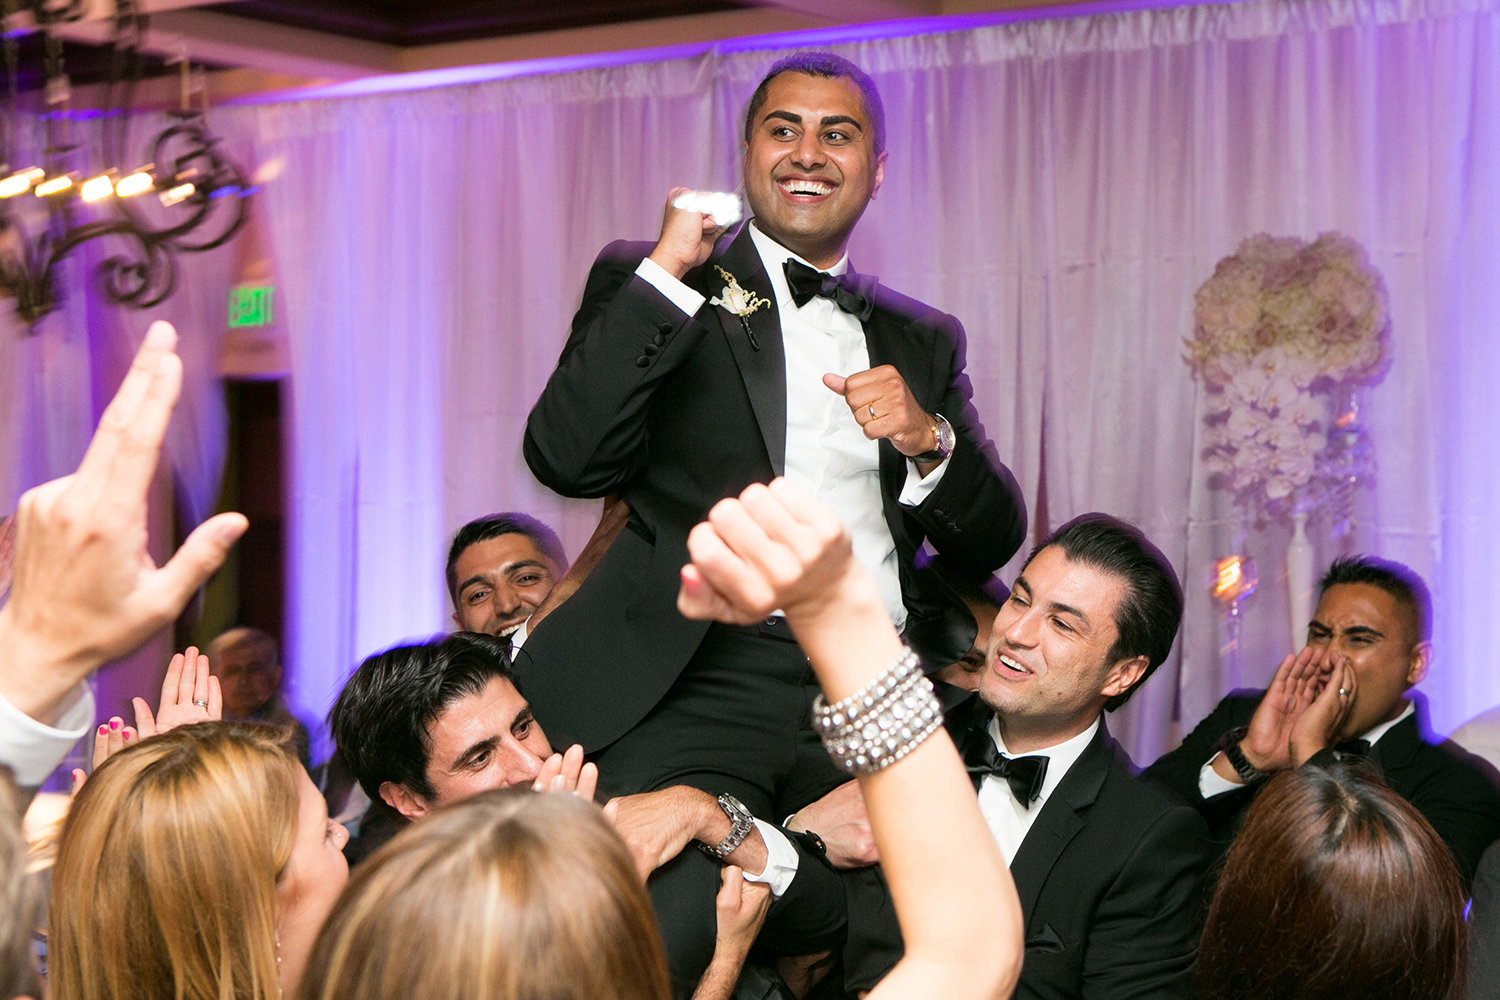 Groom hoisted up in the air during the reception